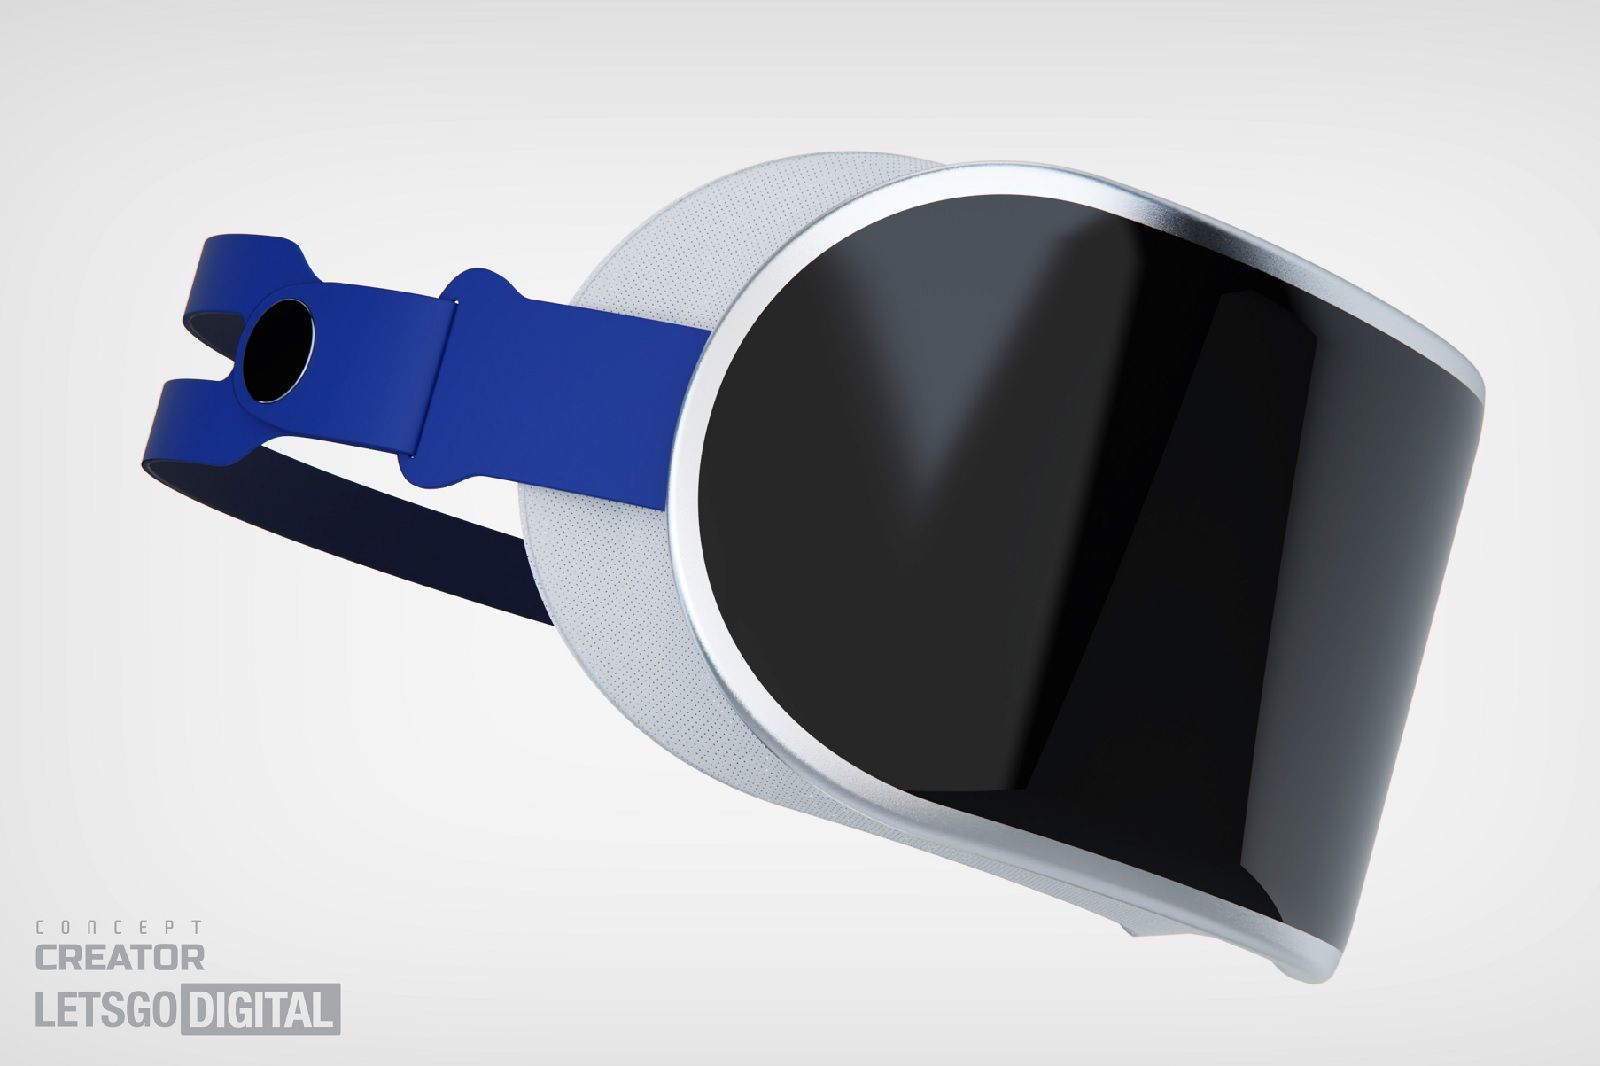 Concept showing Apple Reality Pro headset